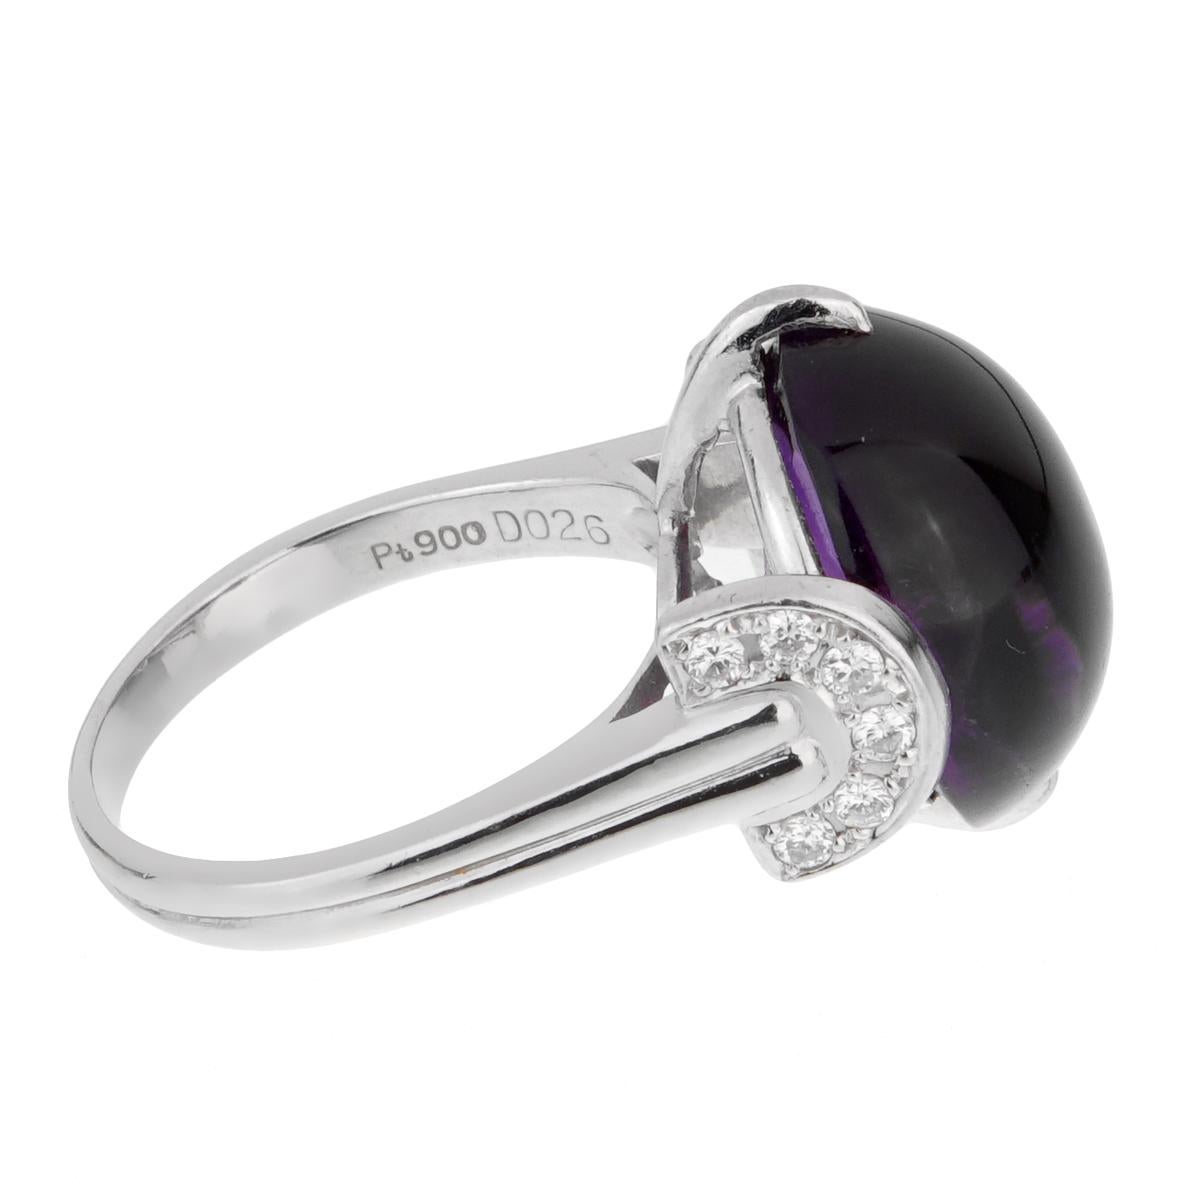 A magnificent Christian Dior diamond ring featuring an oval cabochon amethyst adorned with 12 of the finest round brilliant cut diamonds set in platinum. Size 7